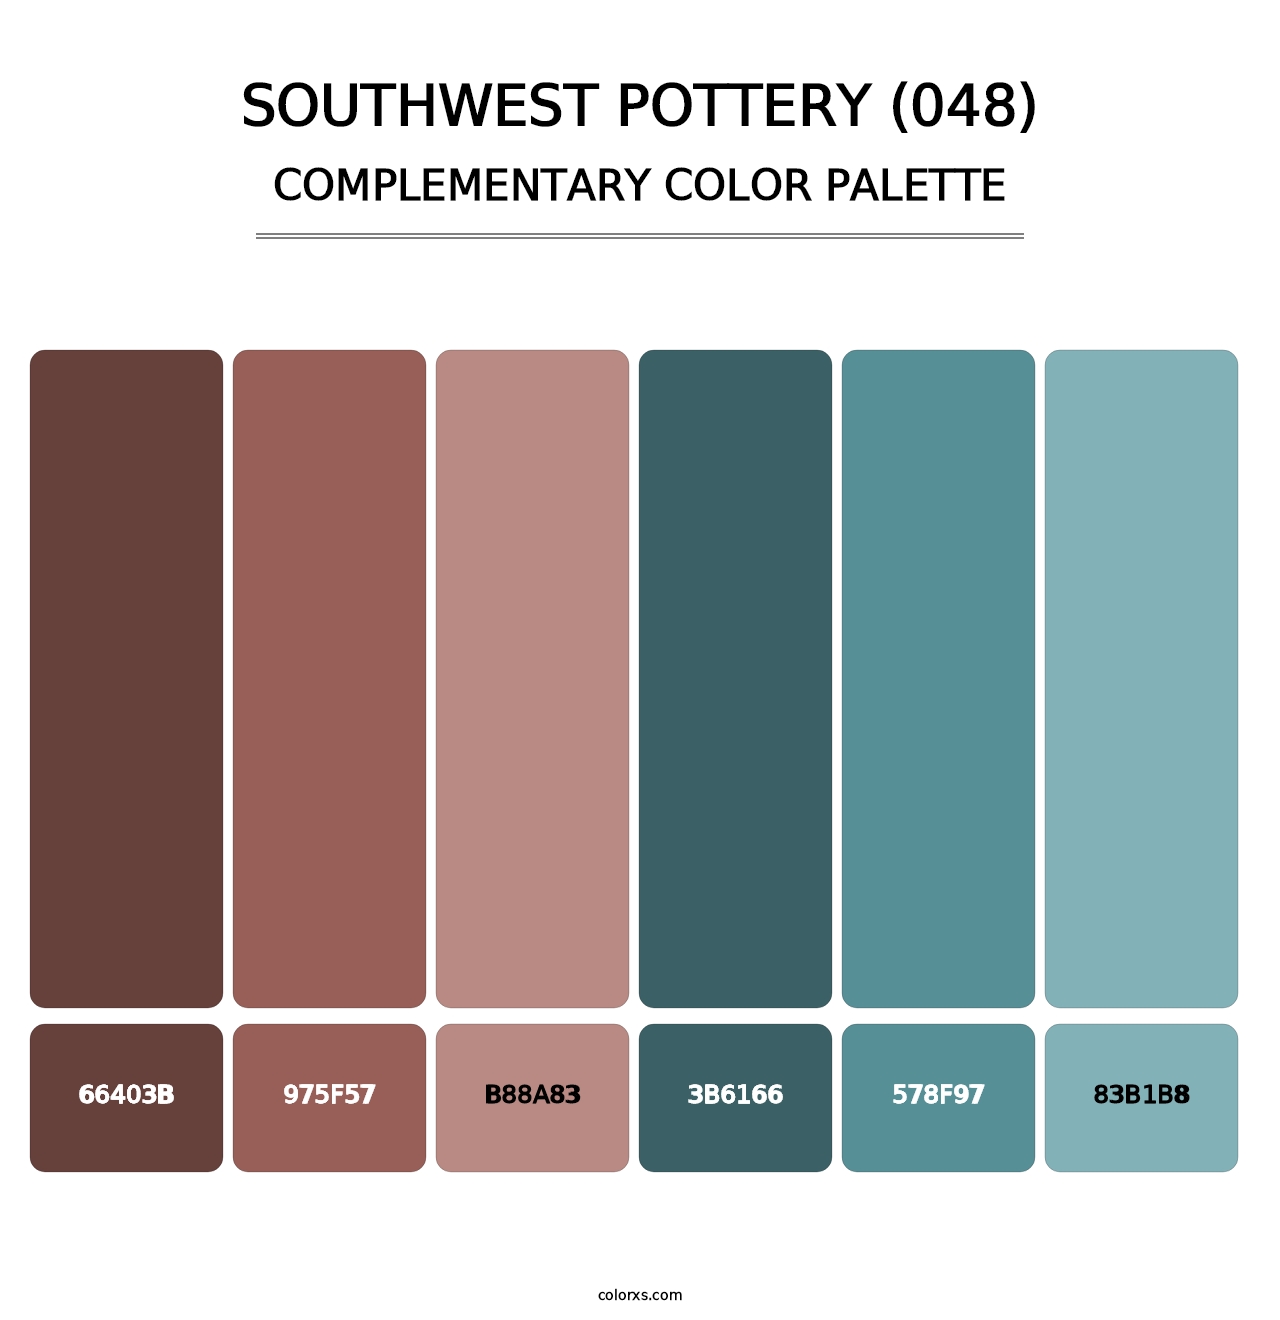 Southwest Pottery (048) - Complementary Color Palette